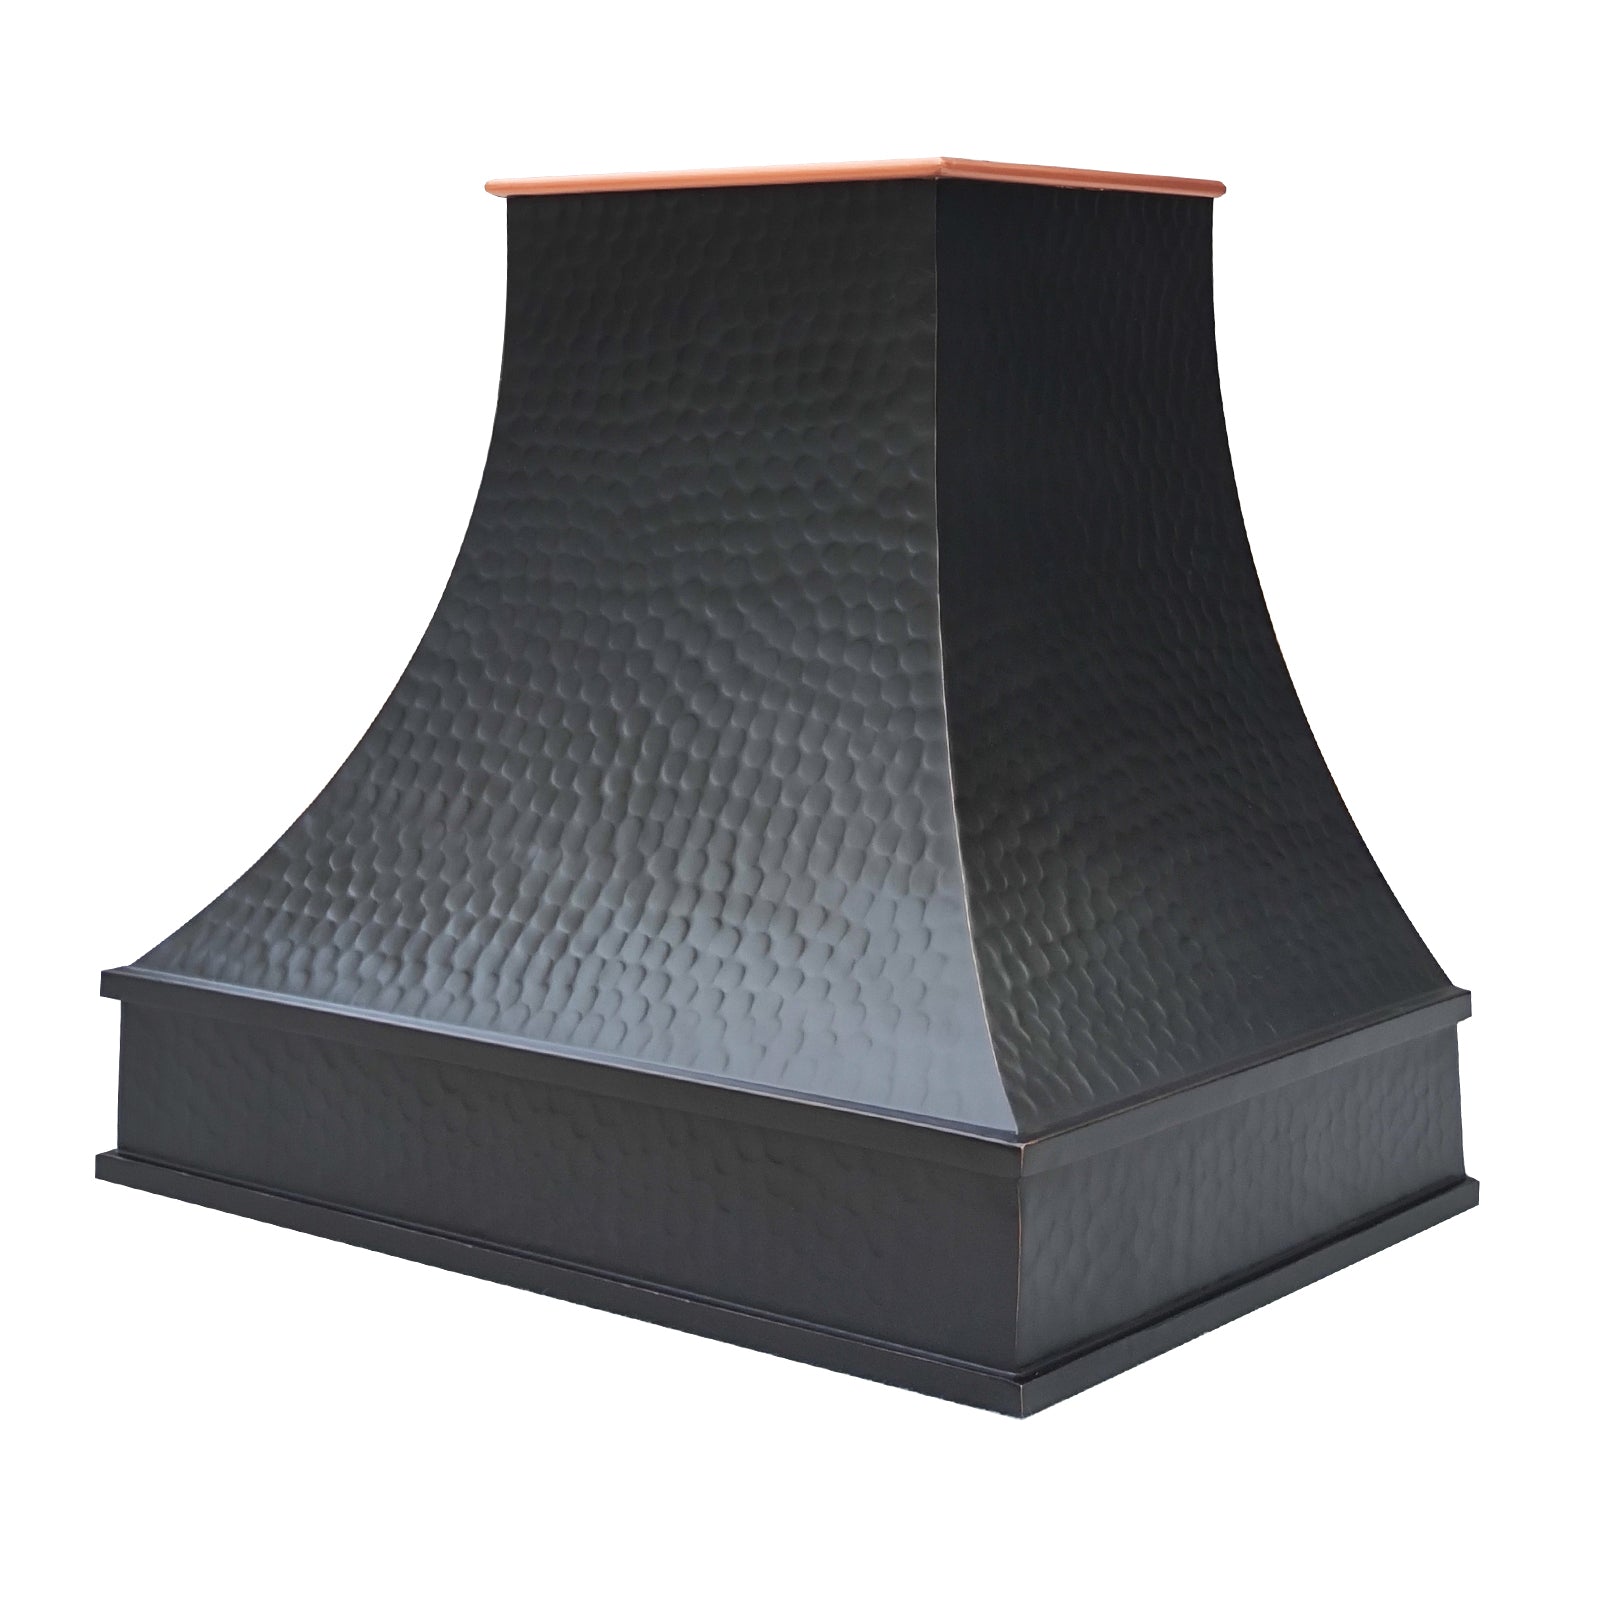 Fobest Custom Bronze Copper Range Hood with natural copper crown FCP-128 - Fobest Appliance